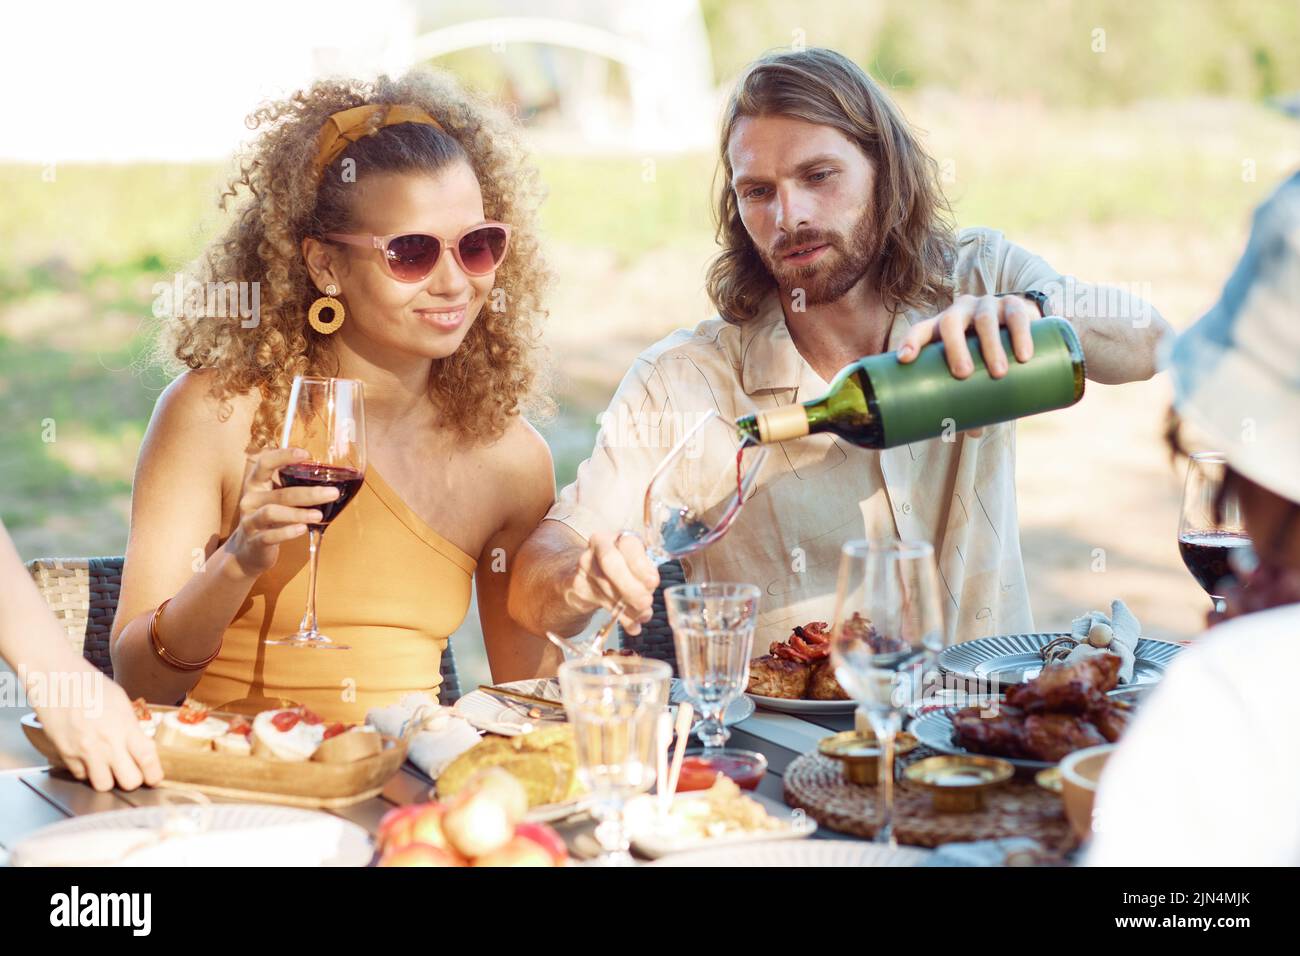 Portrait of young couple pouring red wine into glass while enjoying dinner party with friends outdoors in Summer Stock Photo